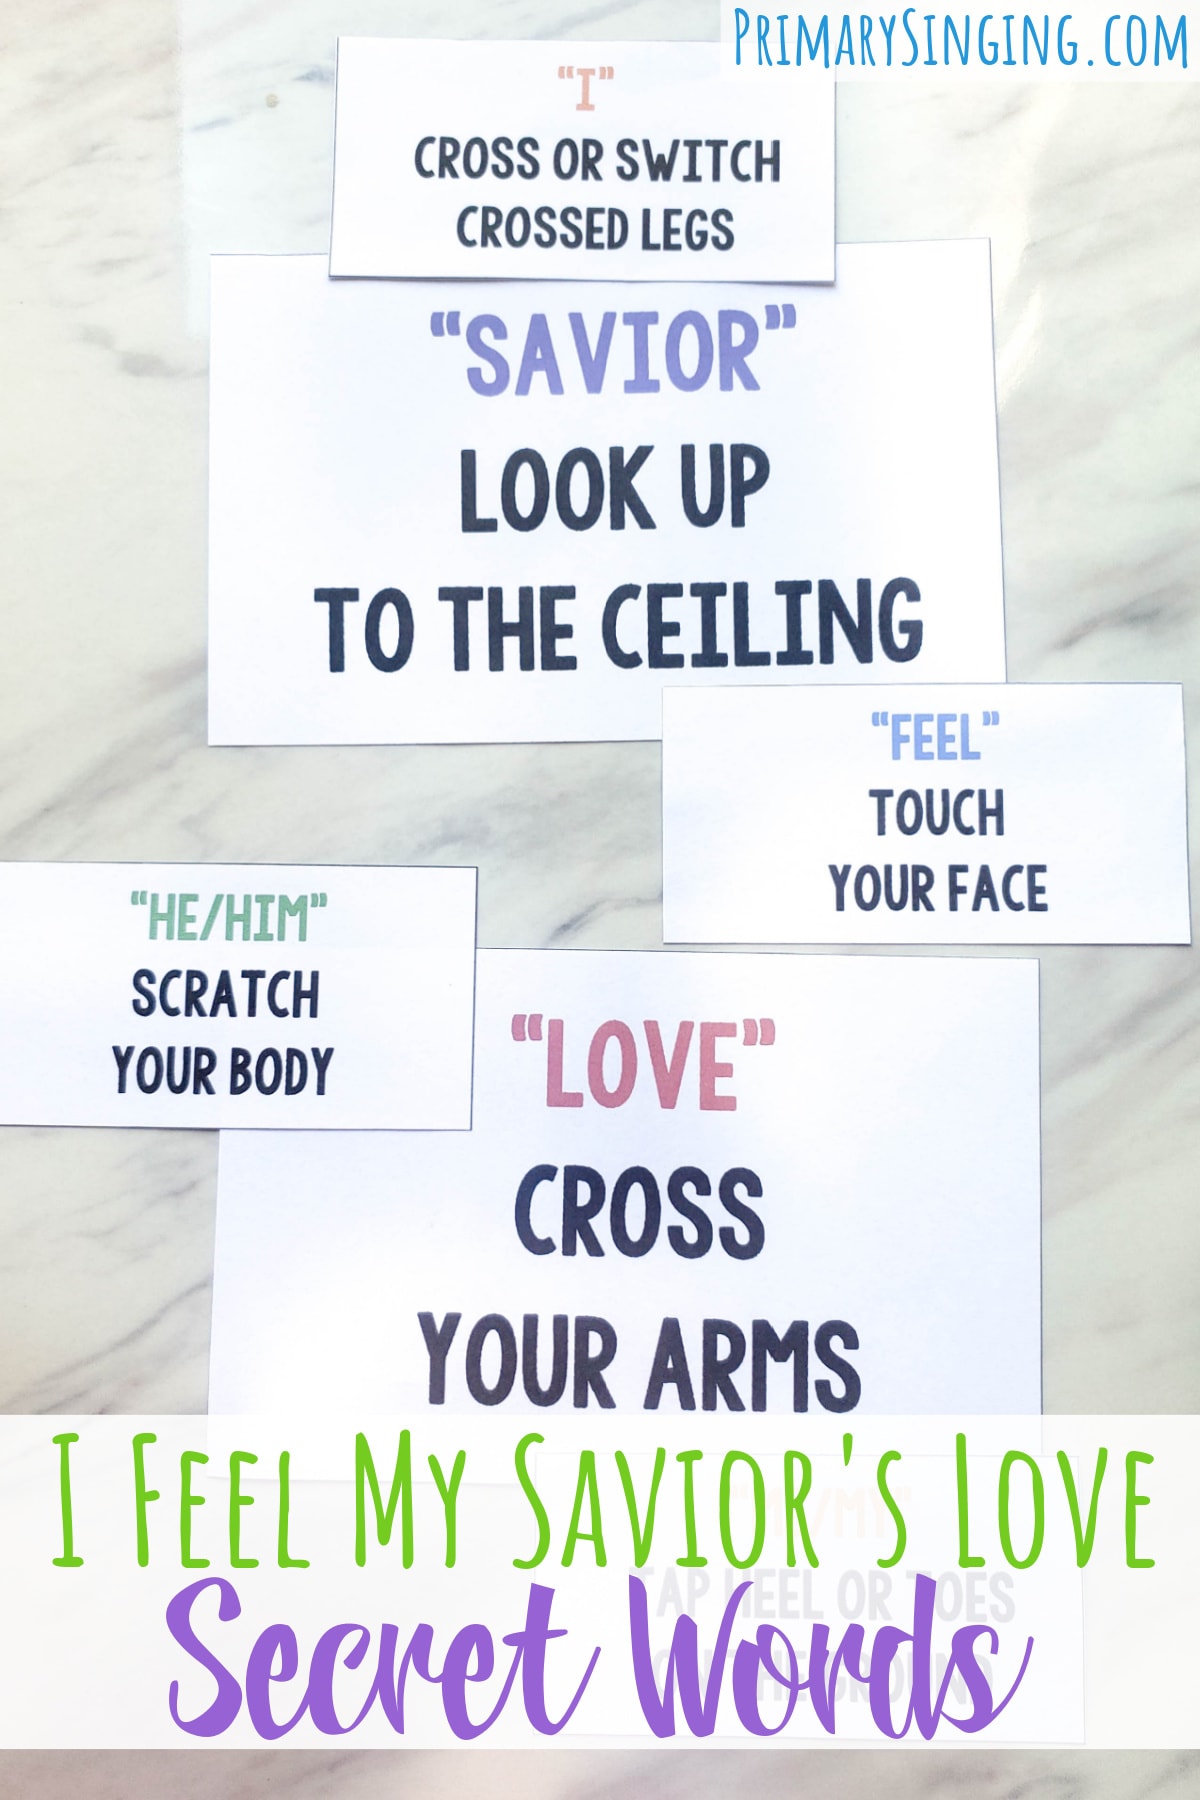 I Feel My Savior's Love Secret Words singing time idea for LDS Primary Music Leaders